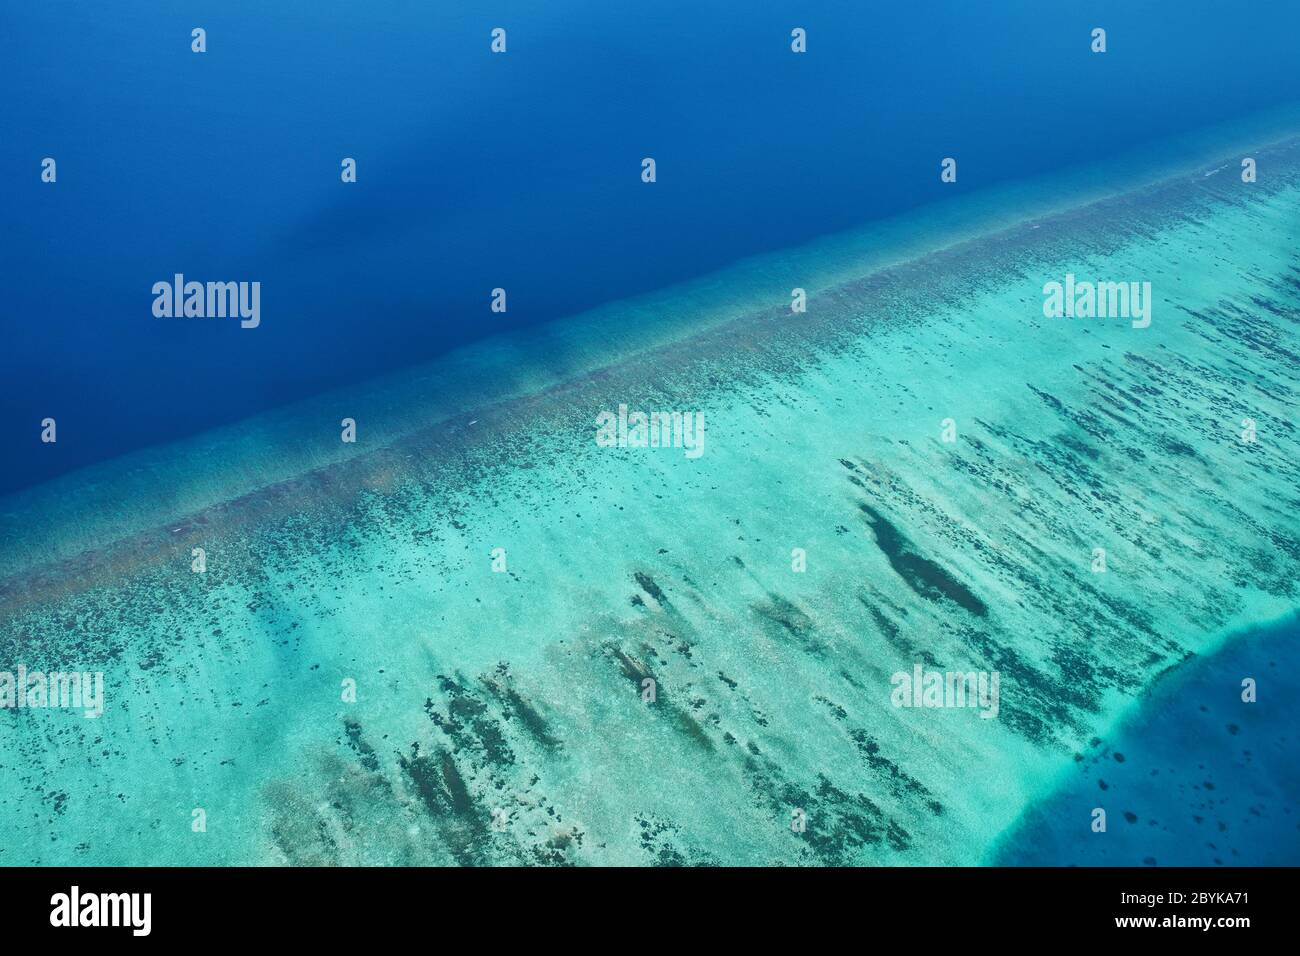 Atolls and islands in Maldives from aerial view Stock Photo